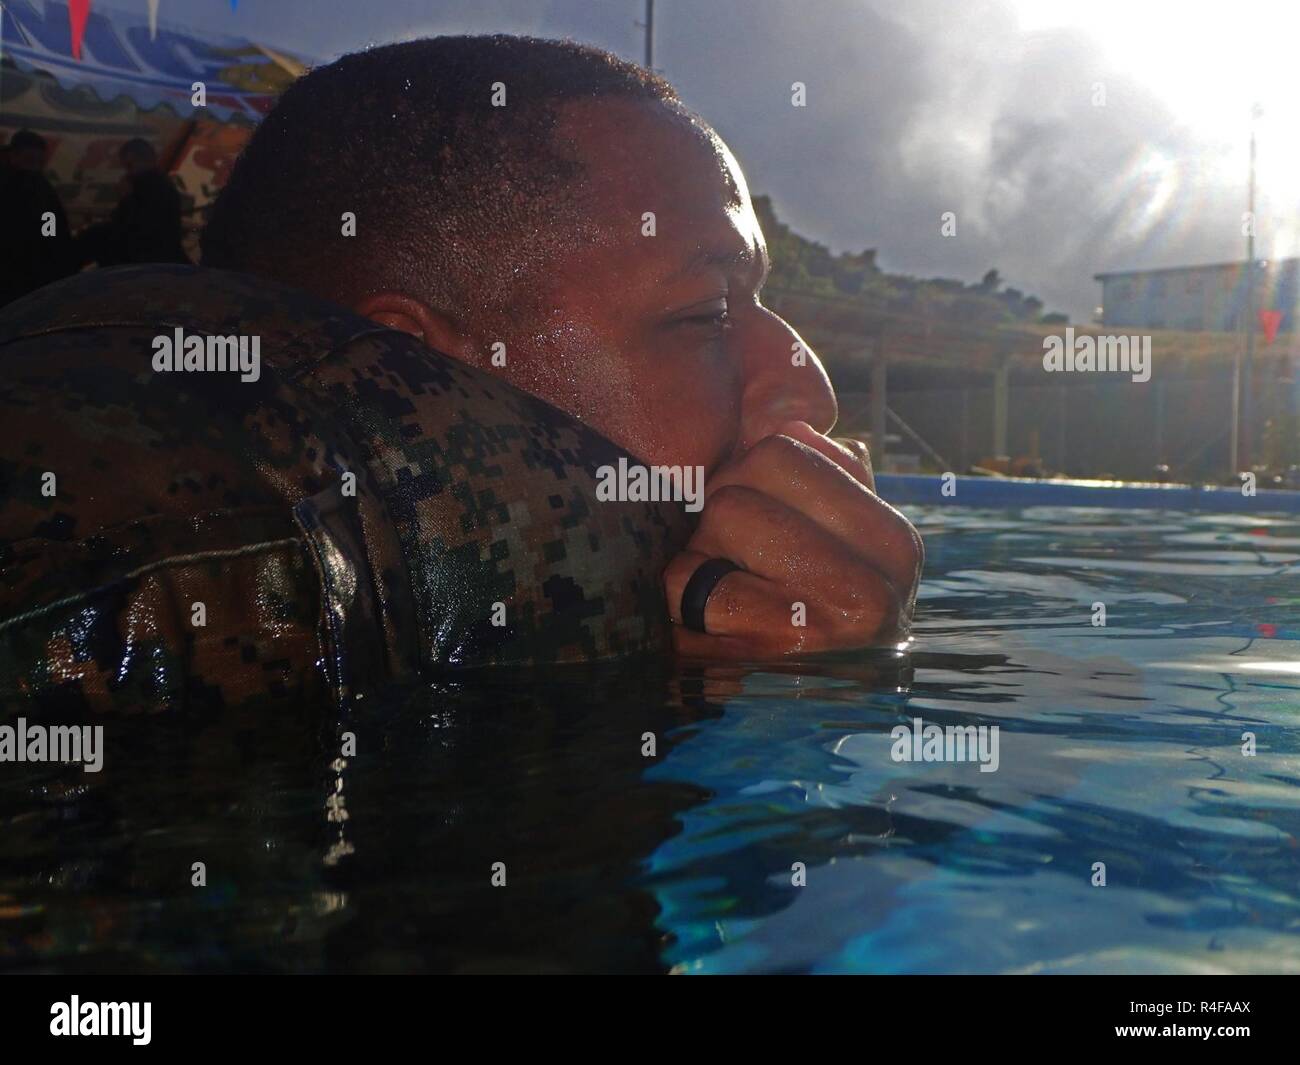 U.S. Marines with Headquarters and Support Battalion, Marine Corps Base Smedley D. Butler, demonstrate the blouse inflation technique during an intermediate swim qualification course at Camp Foster, Okinawa, Japan, Oct. 25, 2016. The purpose of the course is to maintain proficiency, and enhance the Marines skills in water survival techniques. Stock Photo